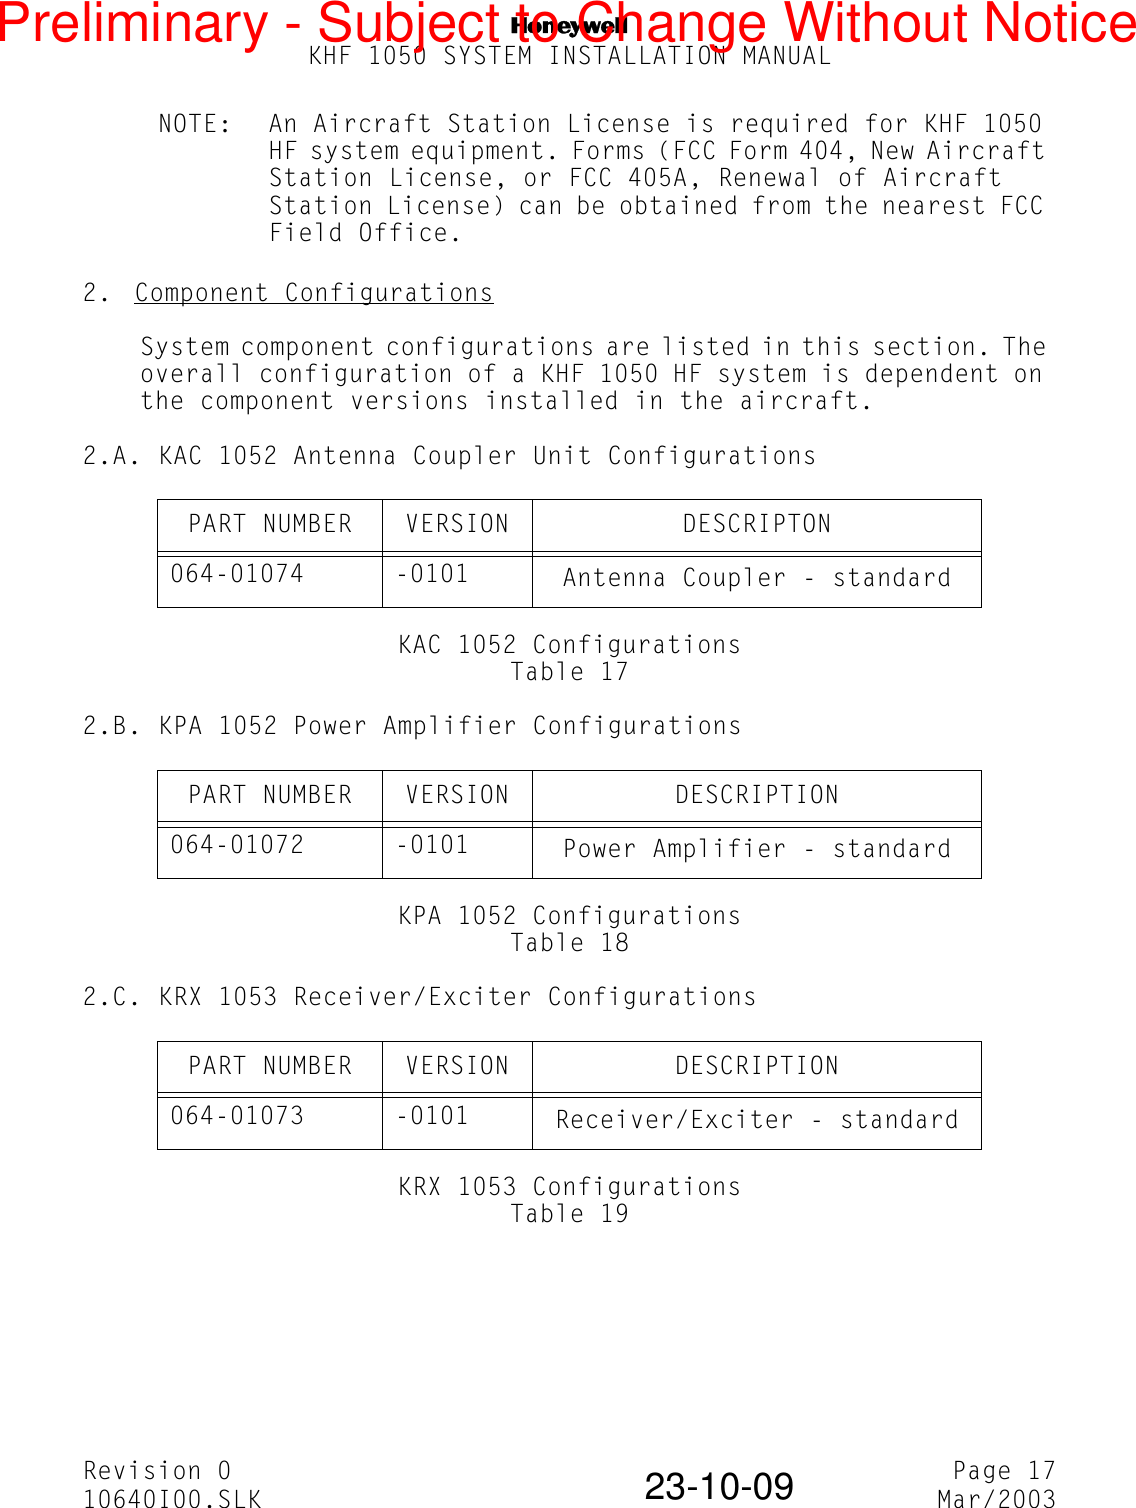 NKHF 1050 SYSTEM INSTALLATION MANUALRevision 0 Page 1710640I00.SLK Mar/200323-10-09NOTE: An Aircraft Station License is required for KHF 1050 HF system equipment. Forms (FCC Form 404, New Aircraft Station License, or FCC 405A, Renewal of Aircraft Station License) can be obtained from the nearest FCC Field Office.2.  Component ConfigurationsSystem component configurations are listed in this section. The overall configuration of a KHF 1050 HF system is dependent on the component versions installed in the aircraft.2.A. KAC 1052 Antenna Coupler Unit ConfigurationsKAC 1052 ConfigurationsTable 172.B. KPA 1052 Power Amplifier ConfigurationsKPA 1052 ConfigurationsTable 182.C. KRX 1053 Receiver/Exciter ConfigurationsKRX 1053 ConfigurationsTable 19PART NUMBER VERSION DESCRIPTON064-01074 -0101 Antenna Coupler - standardPART NUMBER VERSION DESCRIPTION064-01072 -0101 Power Amplifier - standardPART NUMBER VERSION DESCRIPTION064-01073 -0101 Receiver/Exciter - standardPreliminary - Subject to Change Without Notice